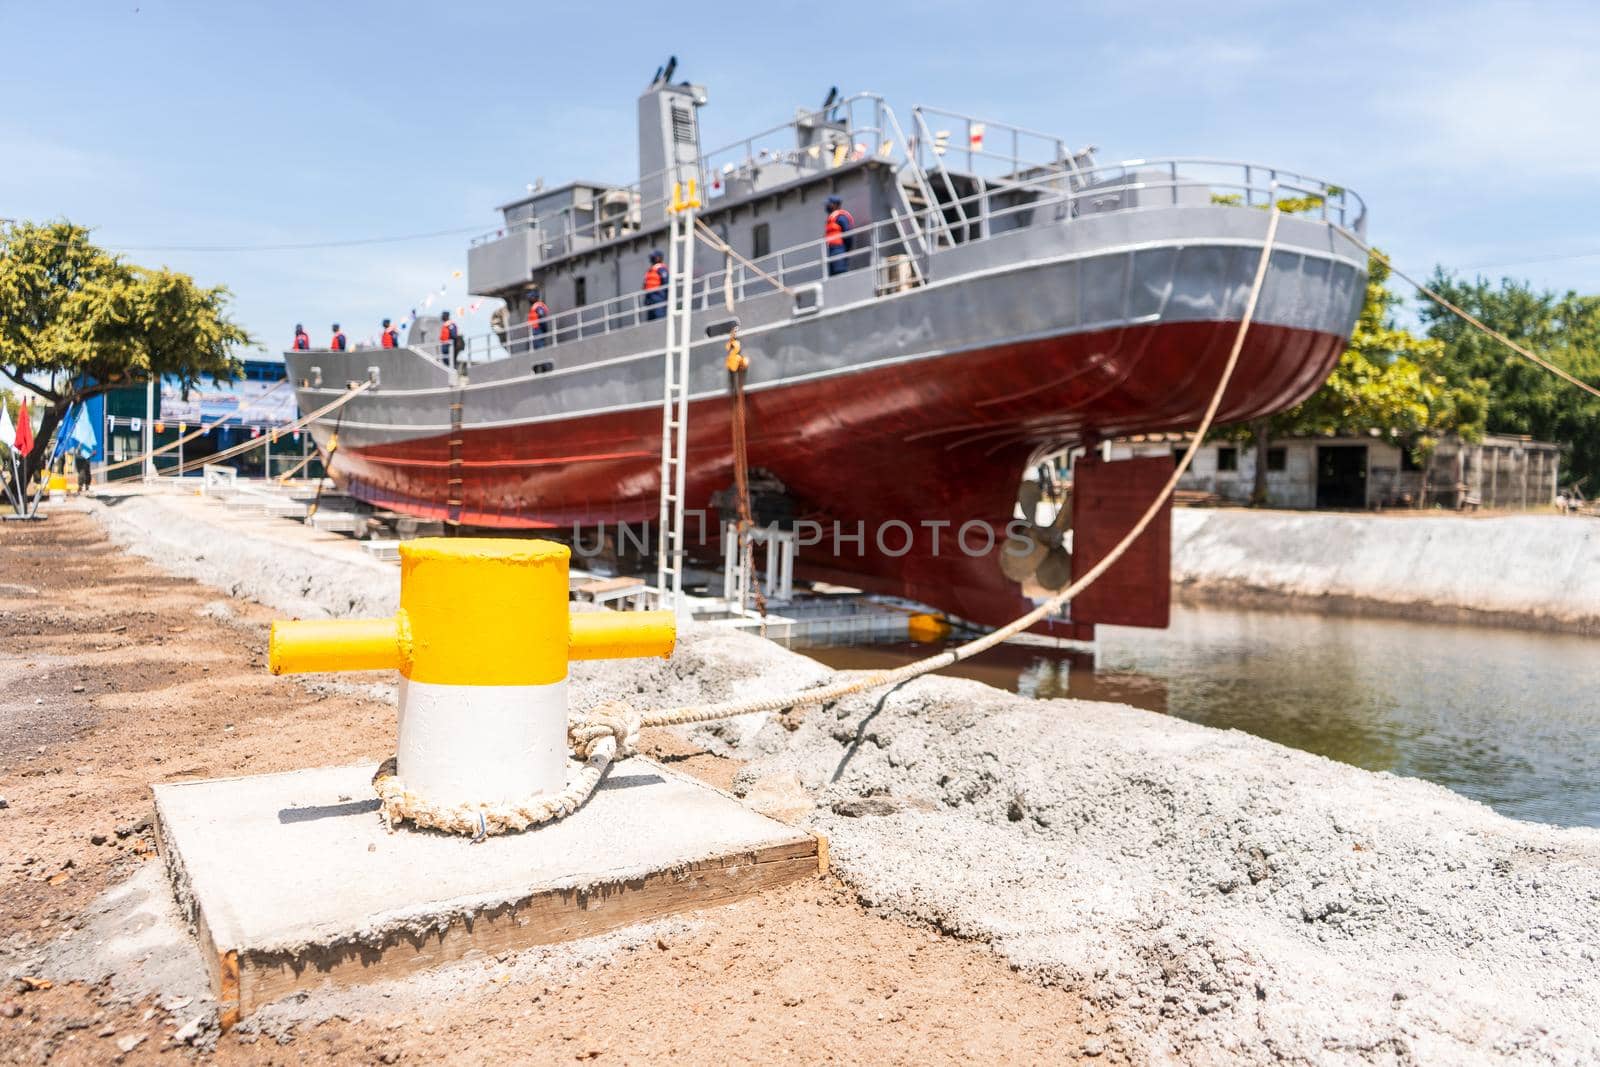 Coastguard in a dry dock waiting to receive repair and maintenance work in Corinto, Nicaragua